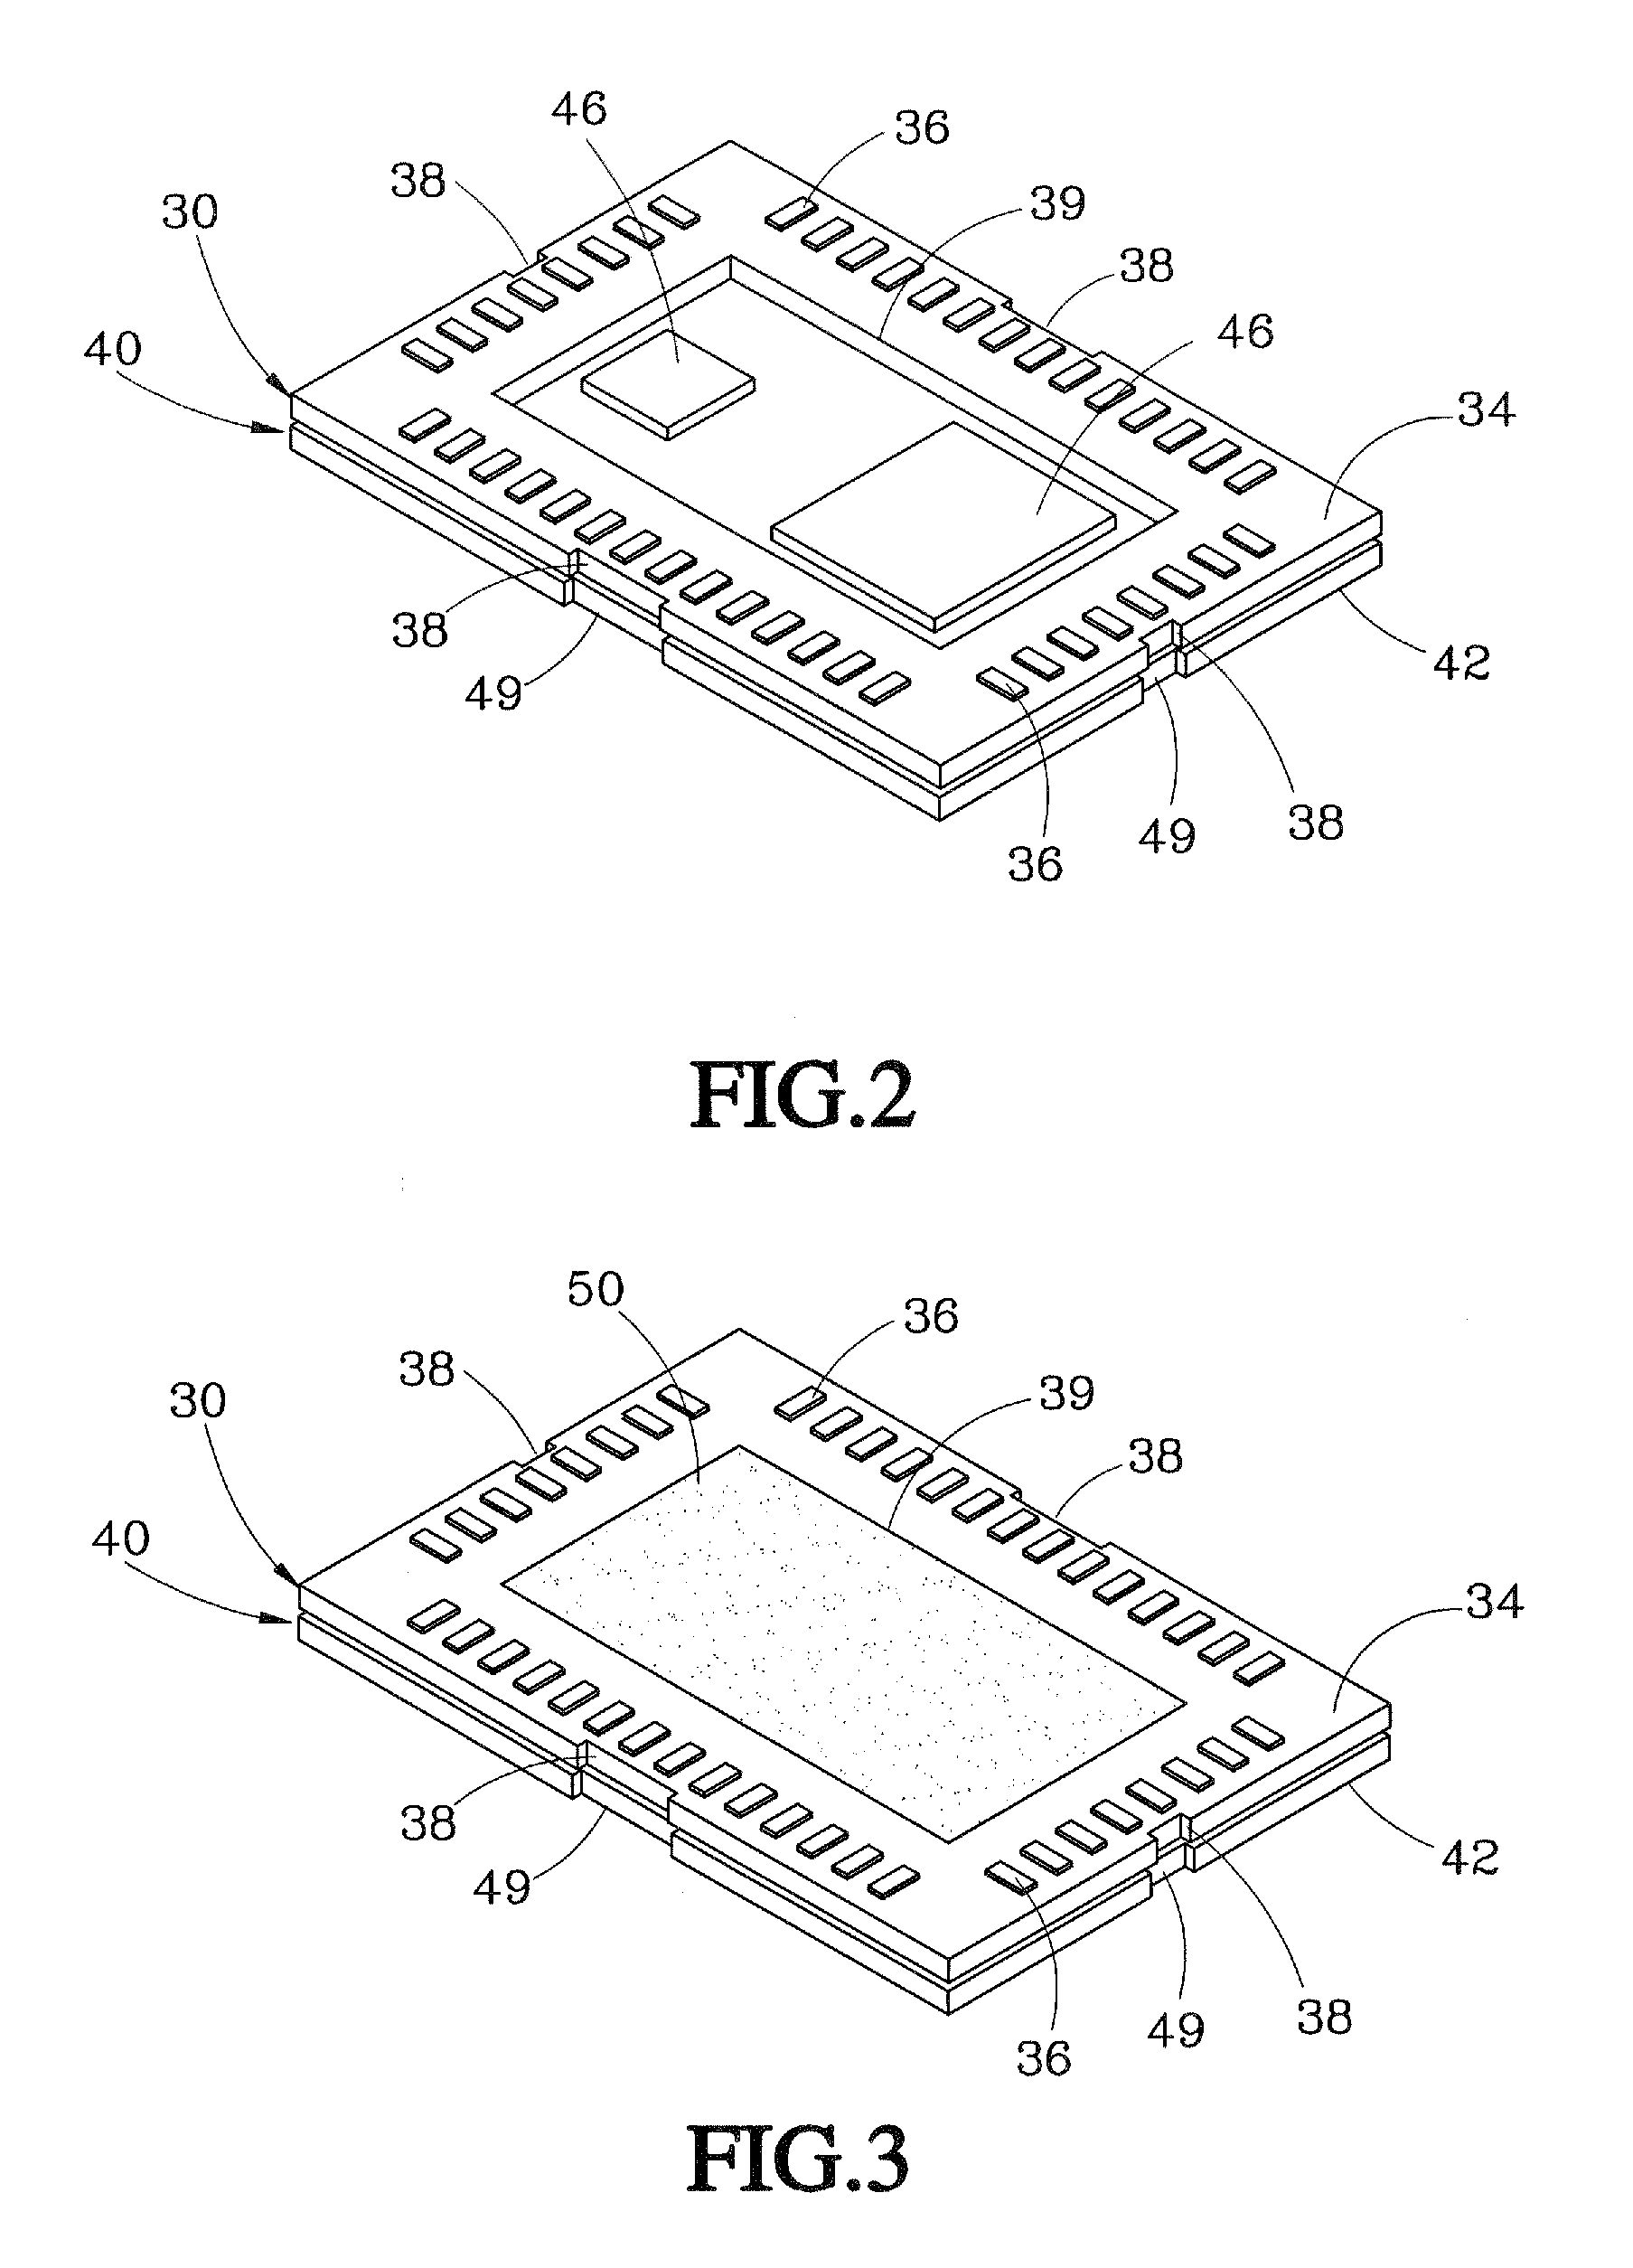 Communication module package assembly